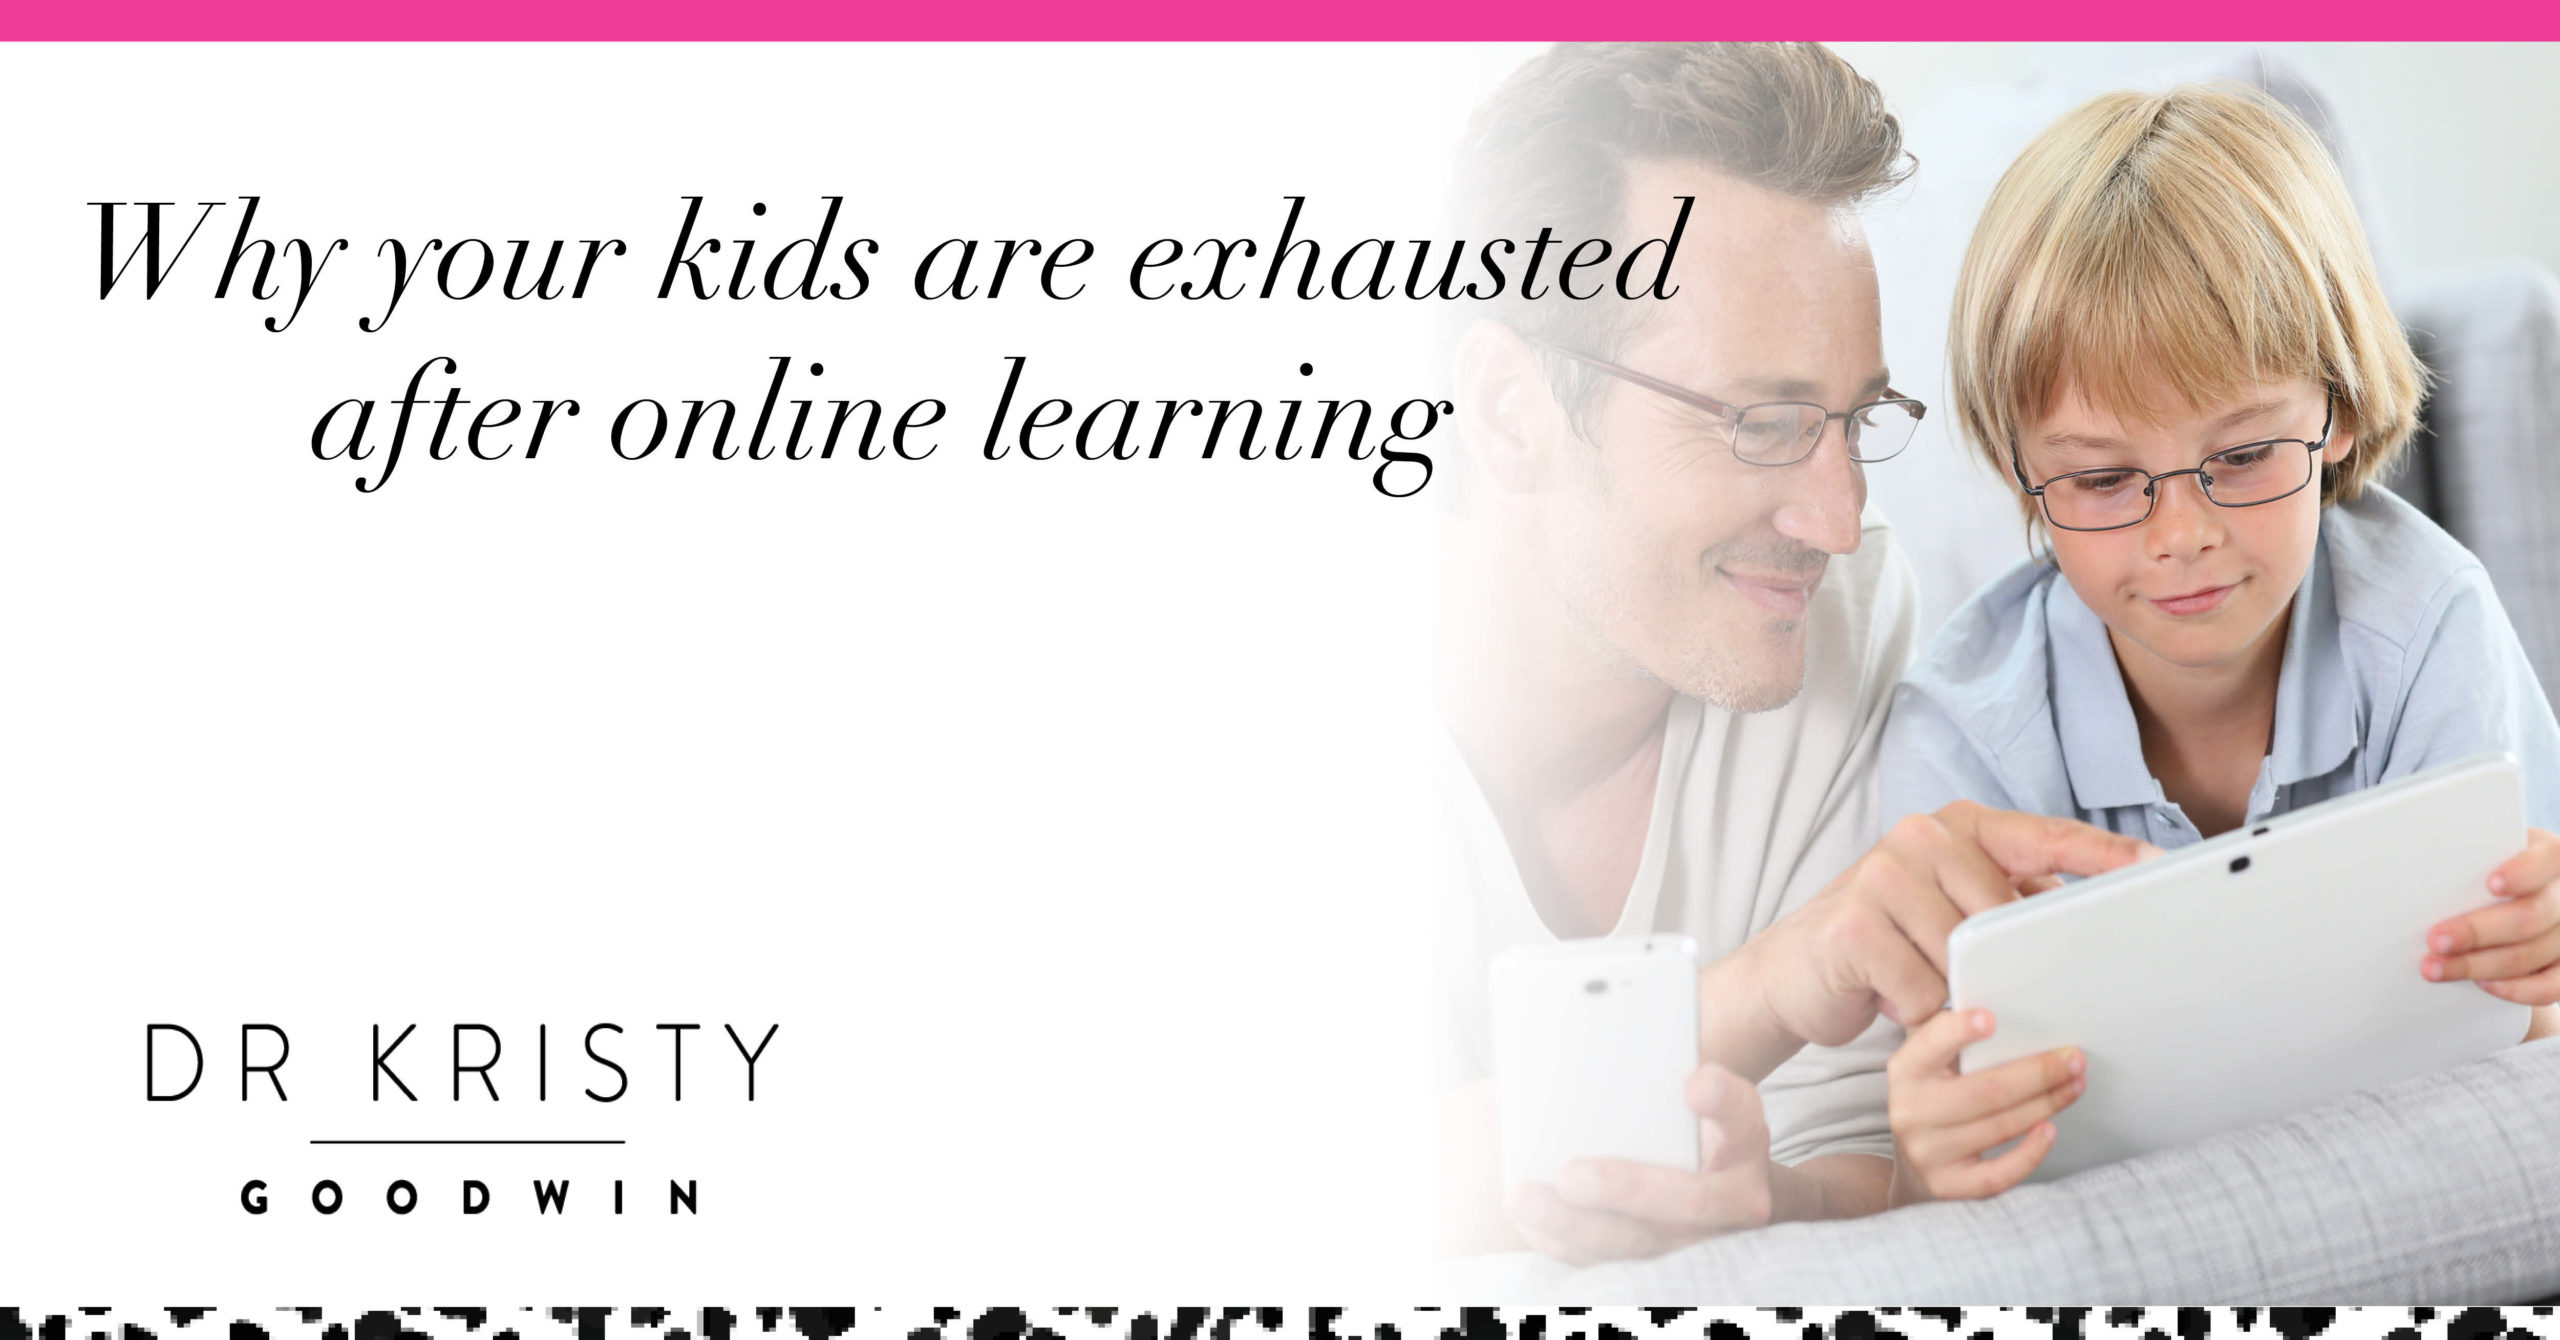 Dr Kristy Goodwin explains why kids are exhausted after leanring online.